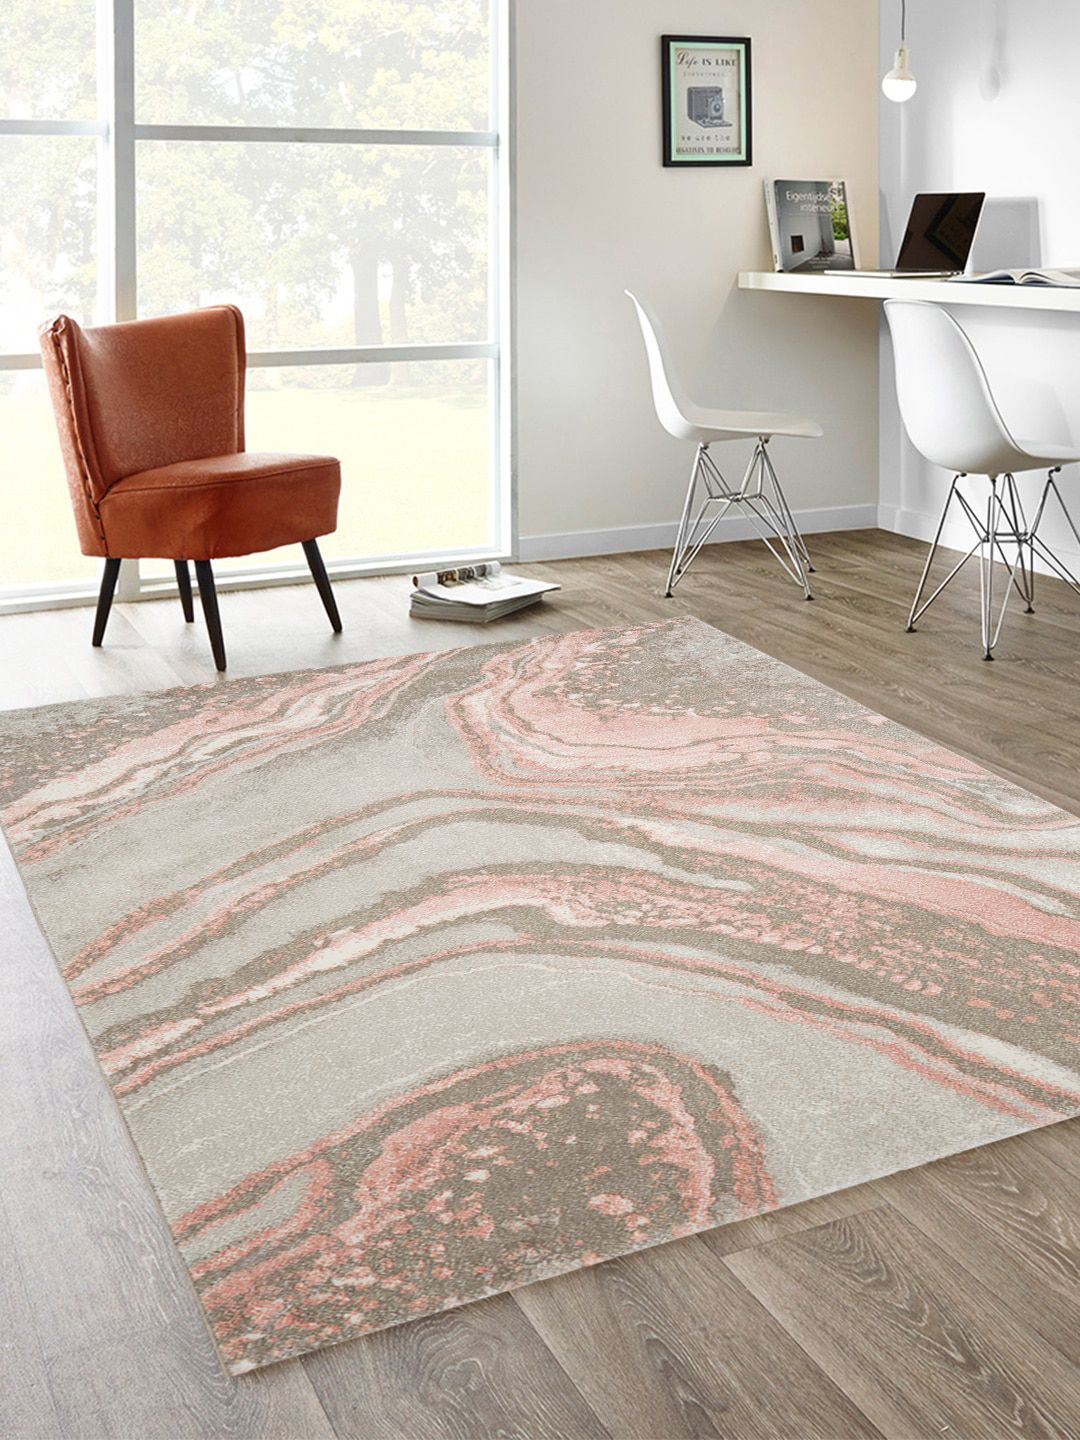 DDecor Grey & Peach Abstract Printed Carpet Price in India